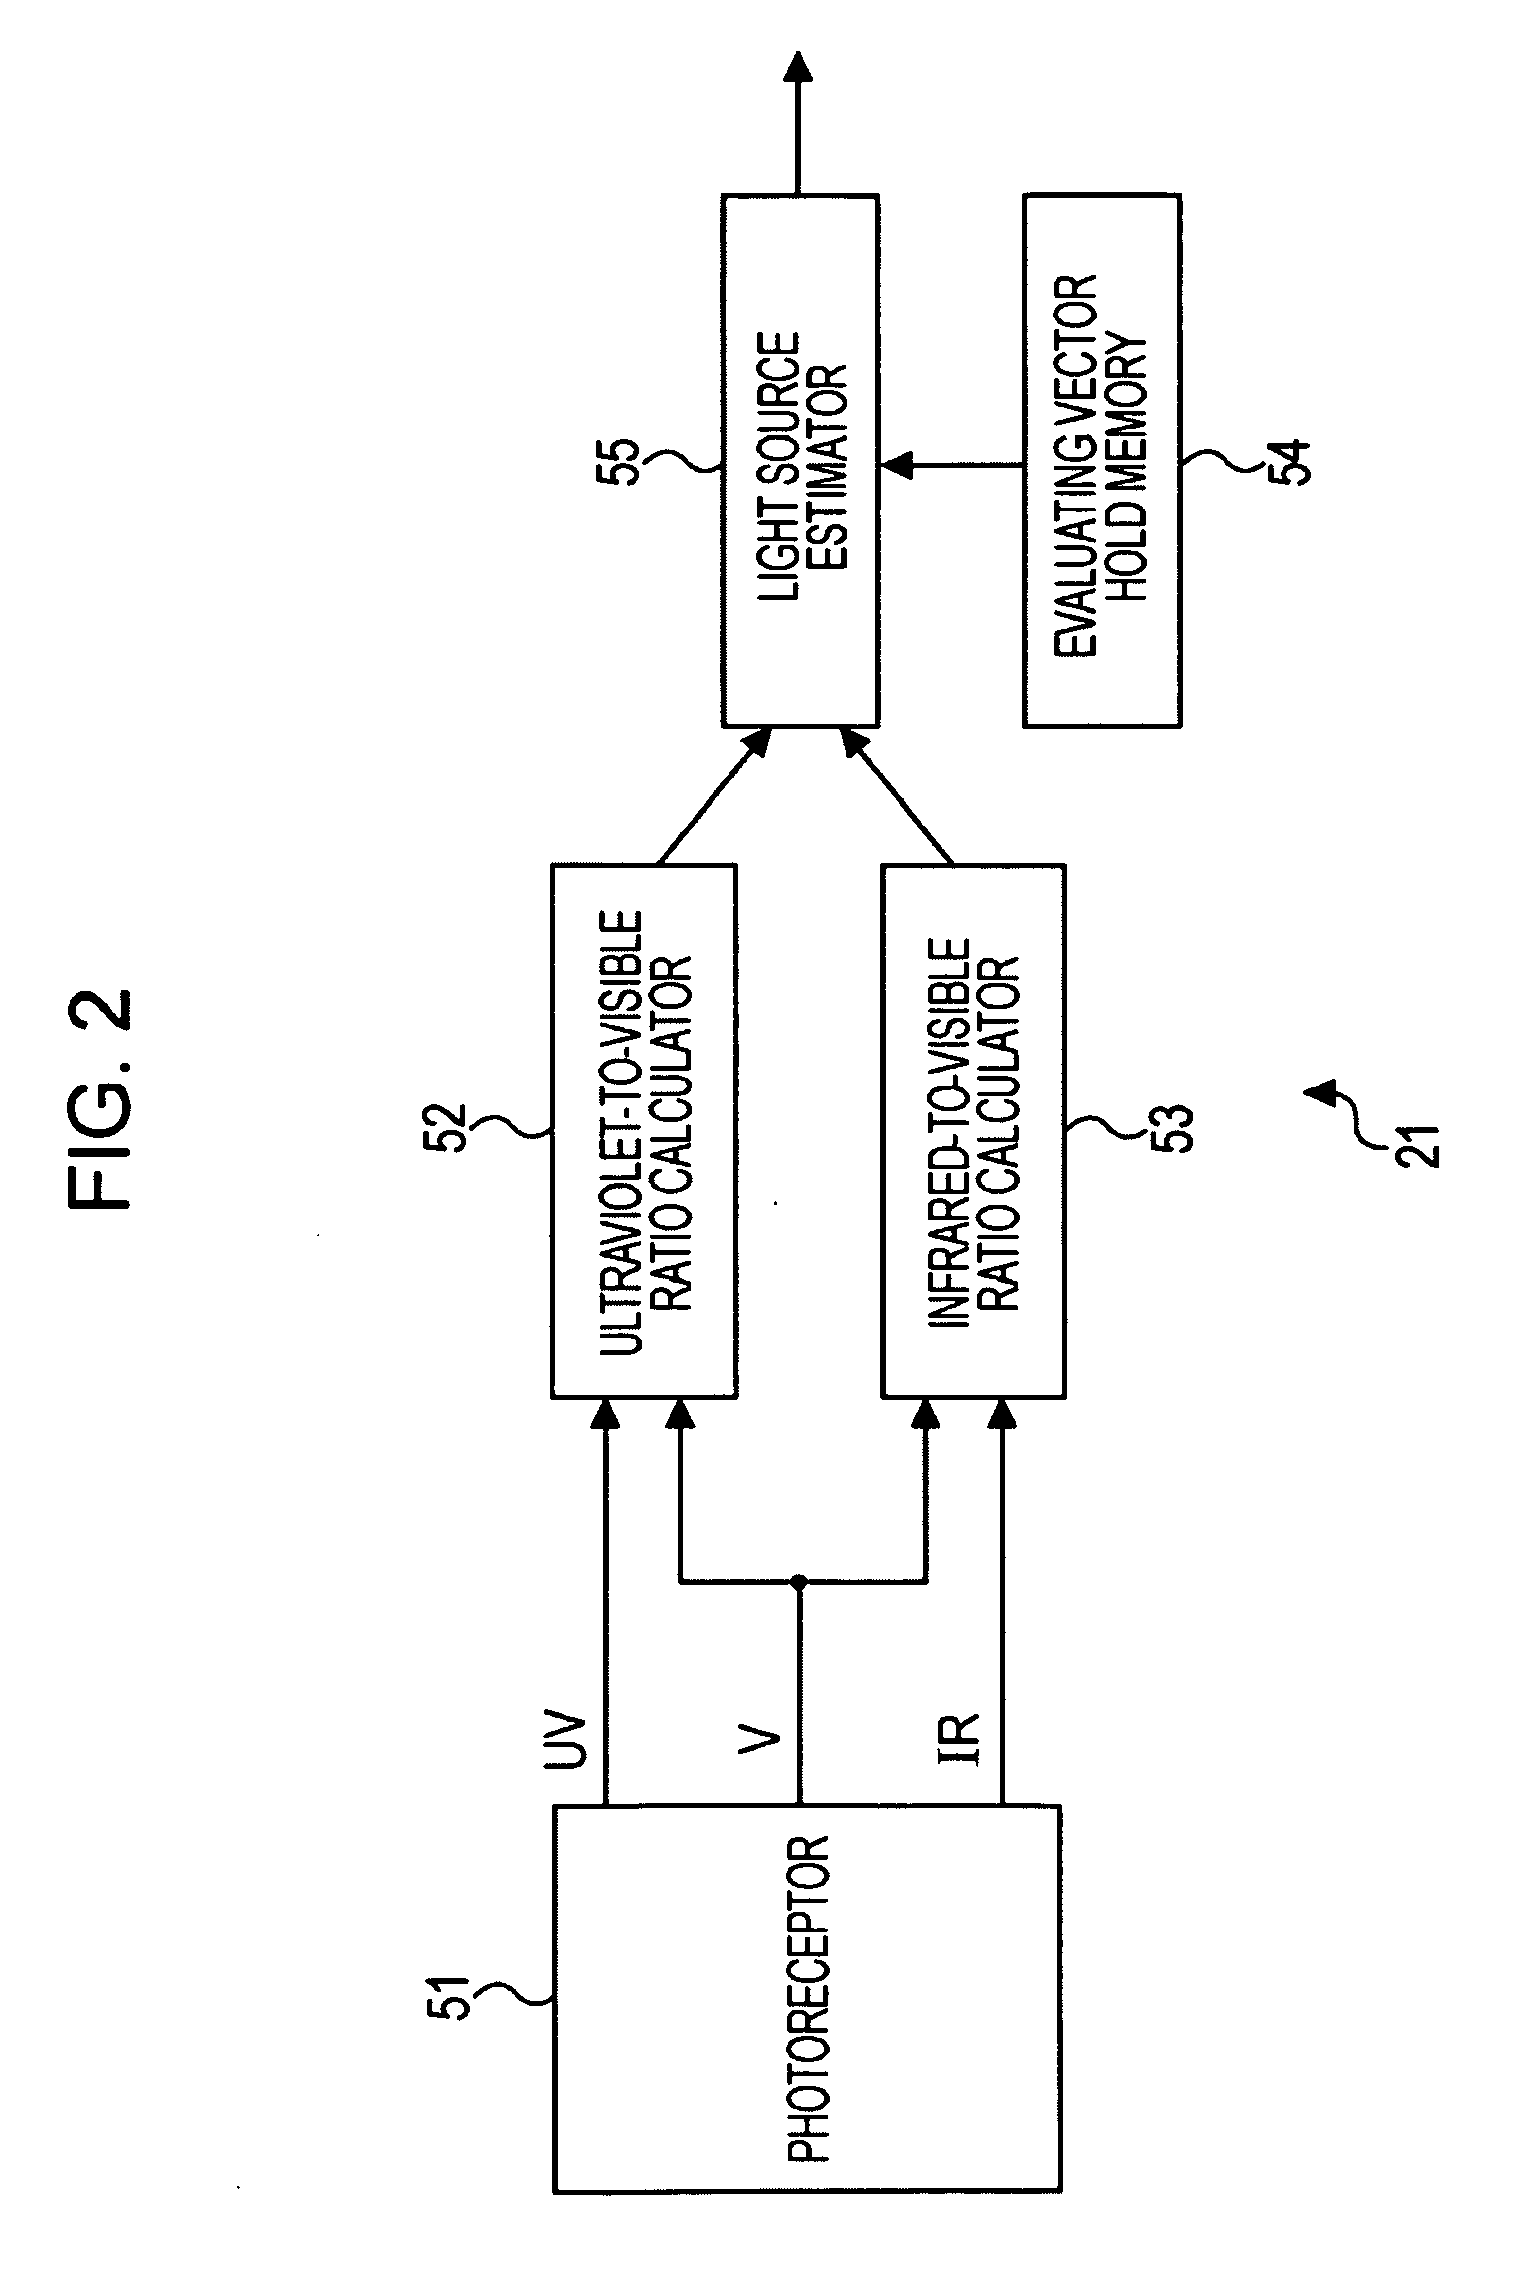 Device, Method, and Program for Estimating Light Source